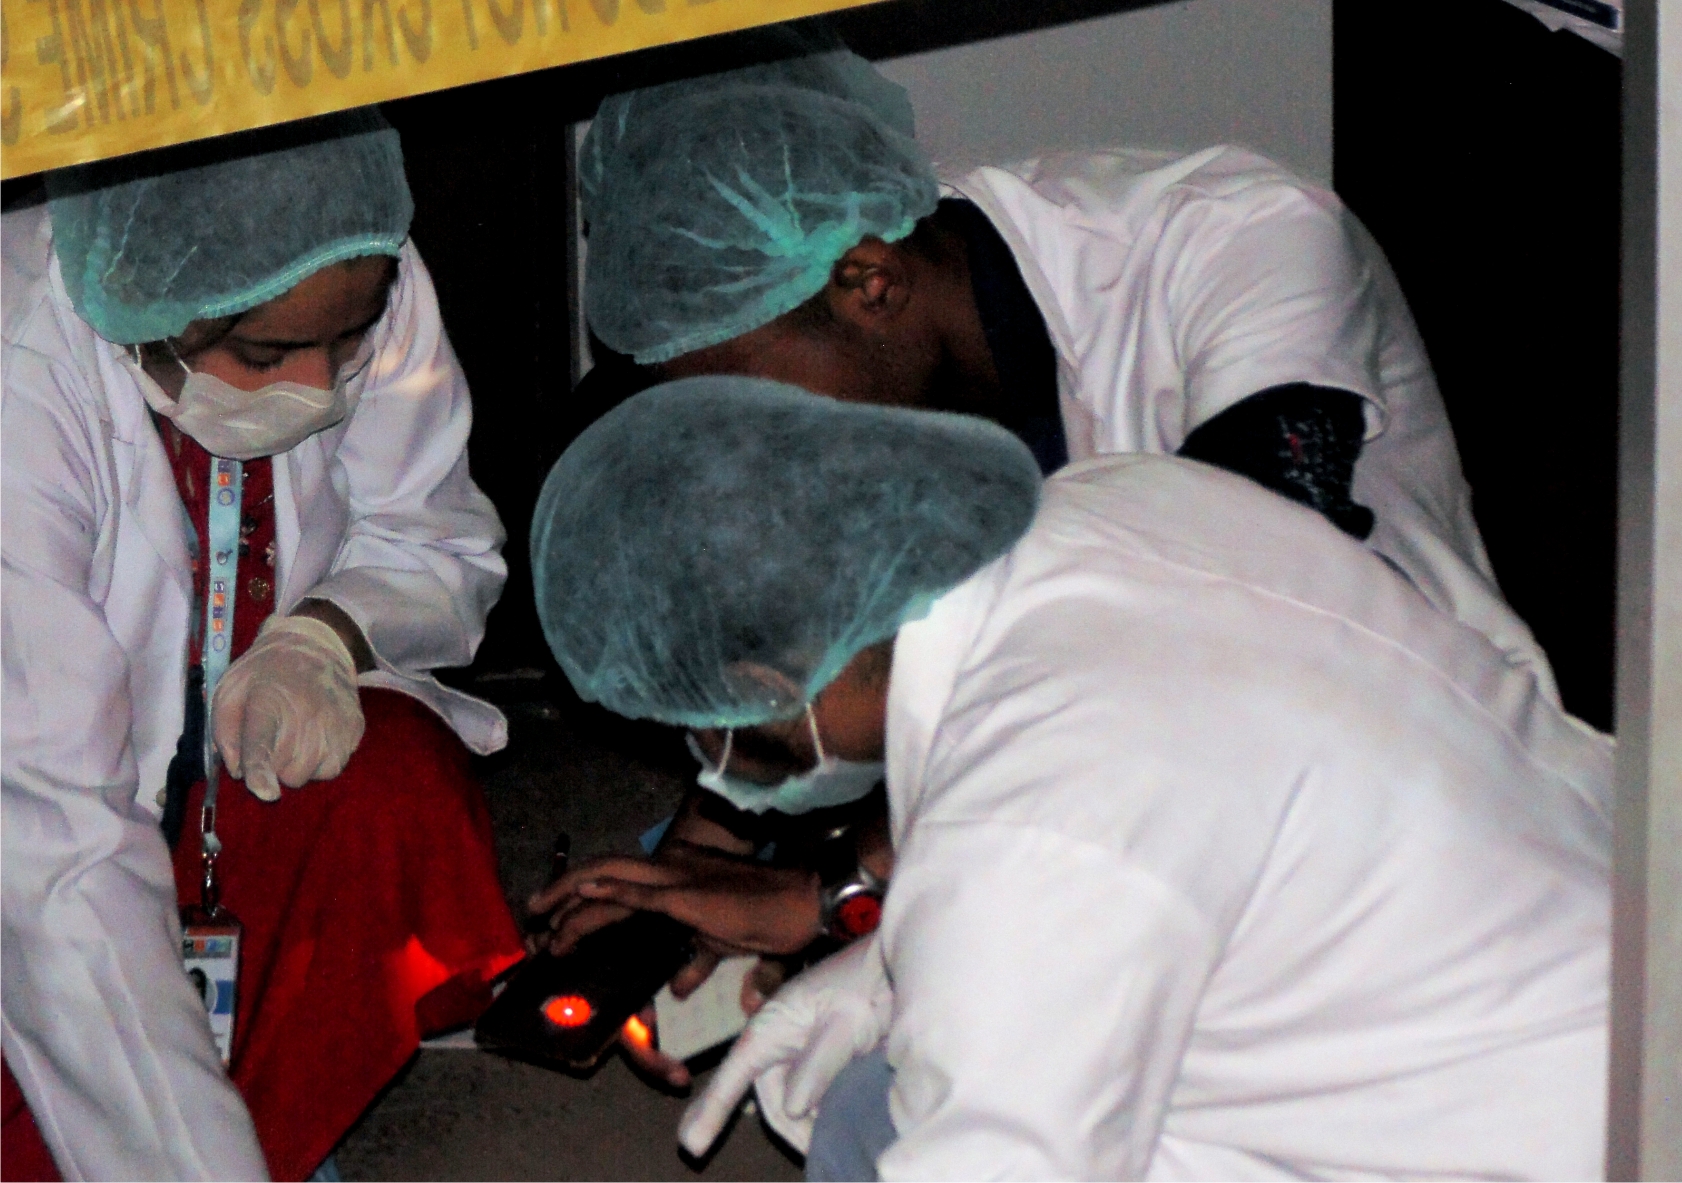 Developing Investigative Skills Under Low-Light Conditions